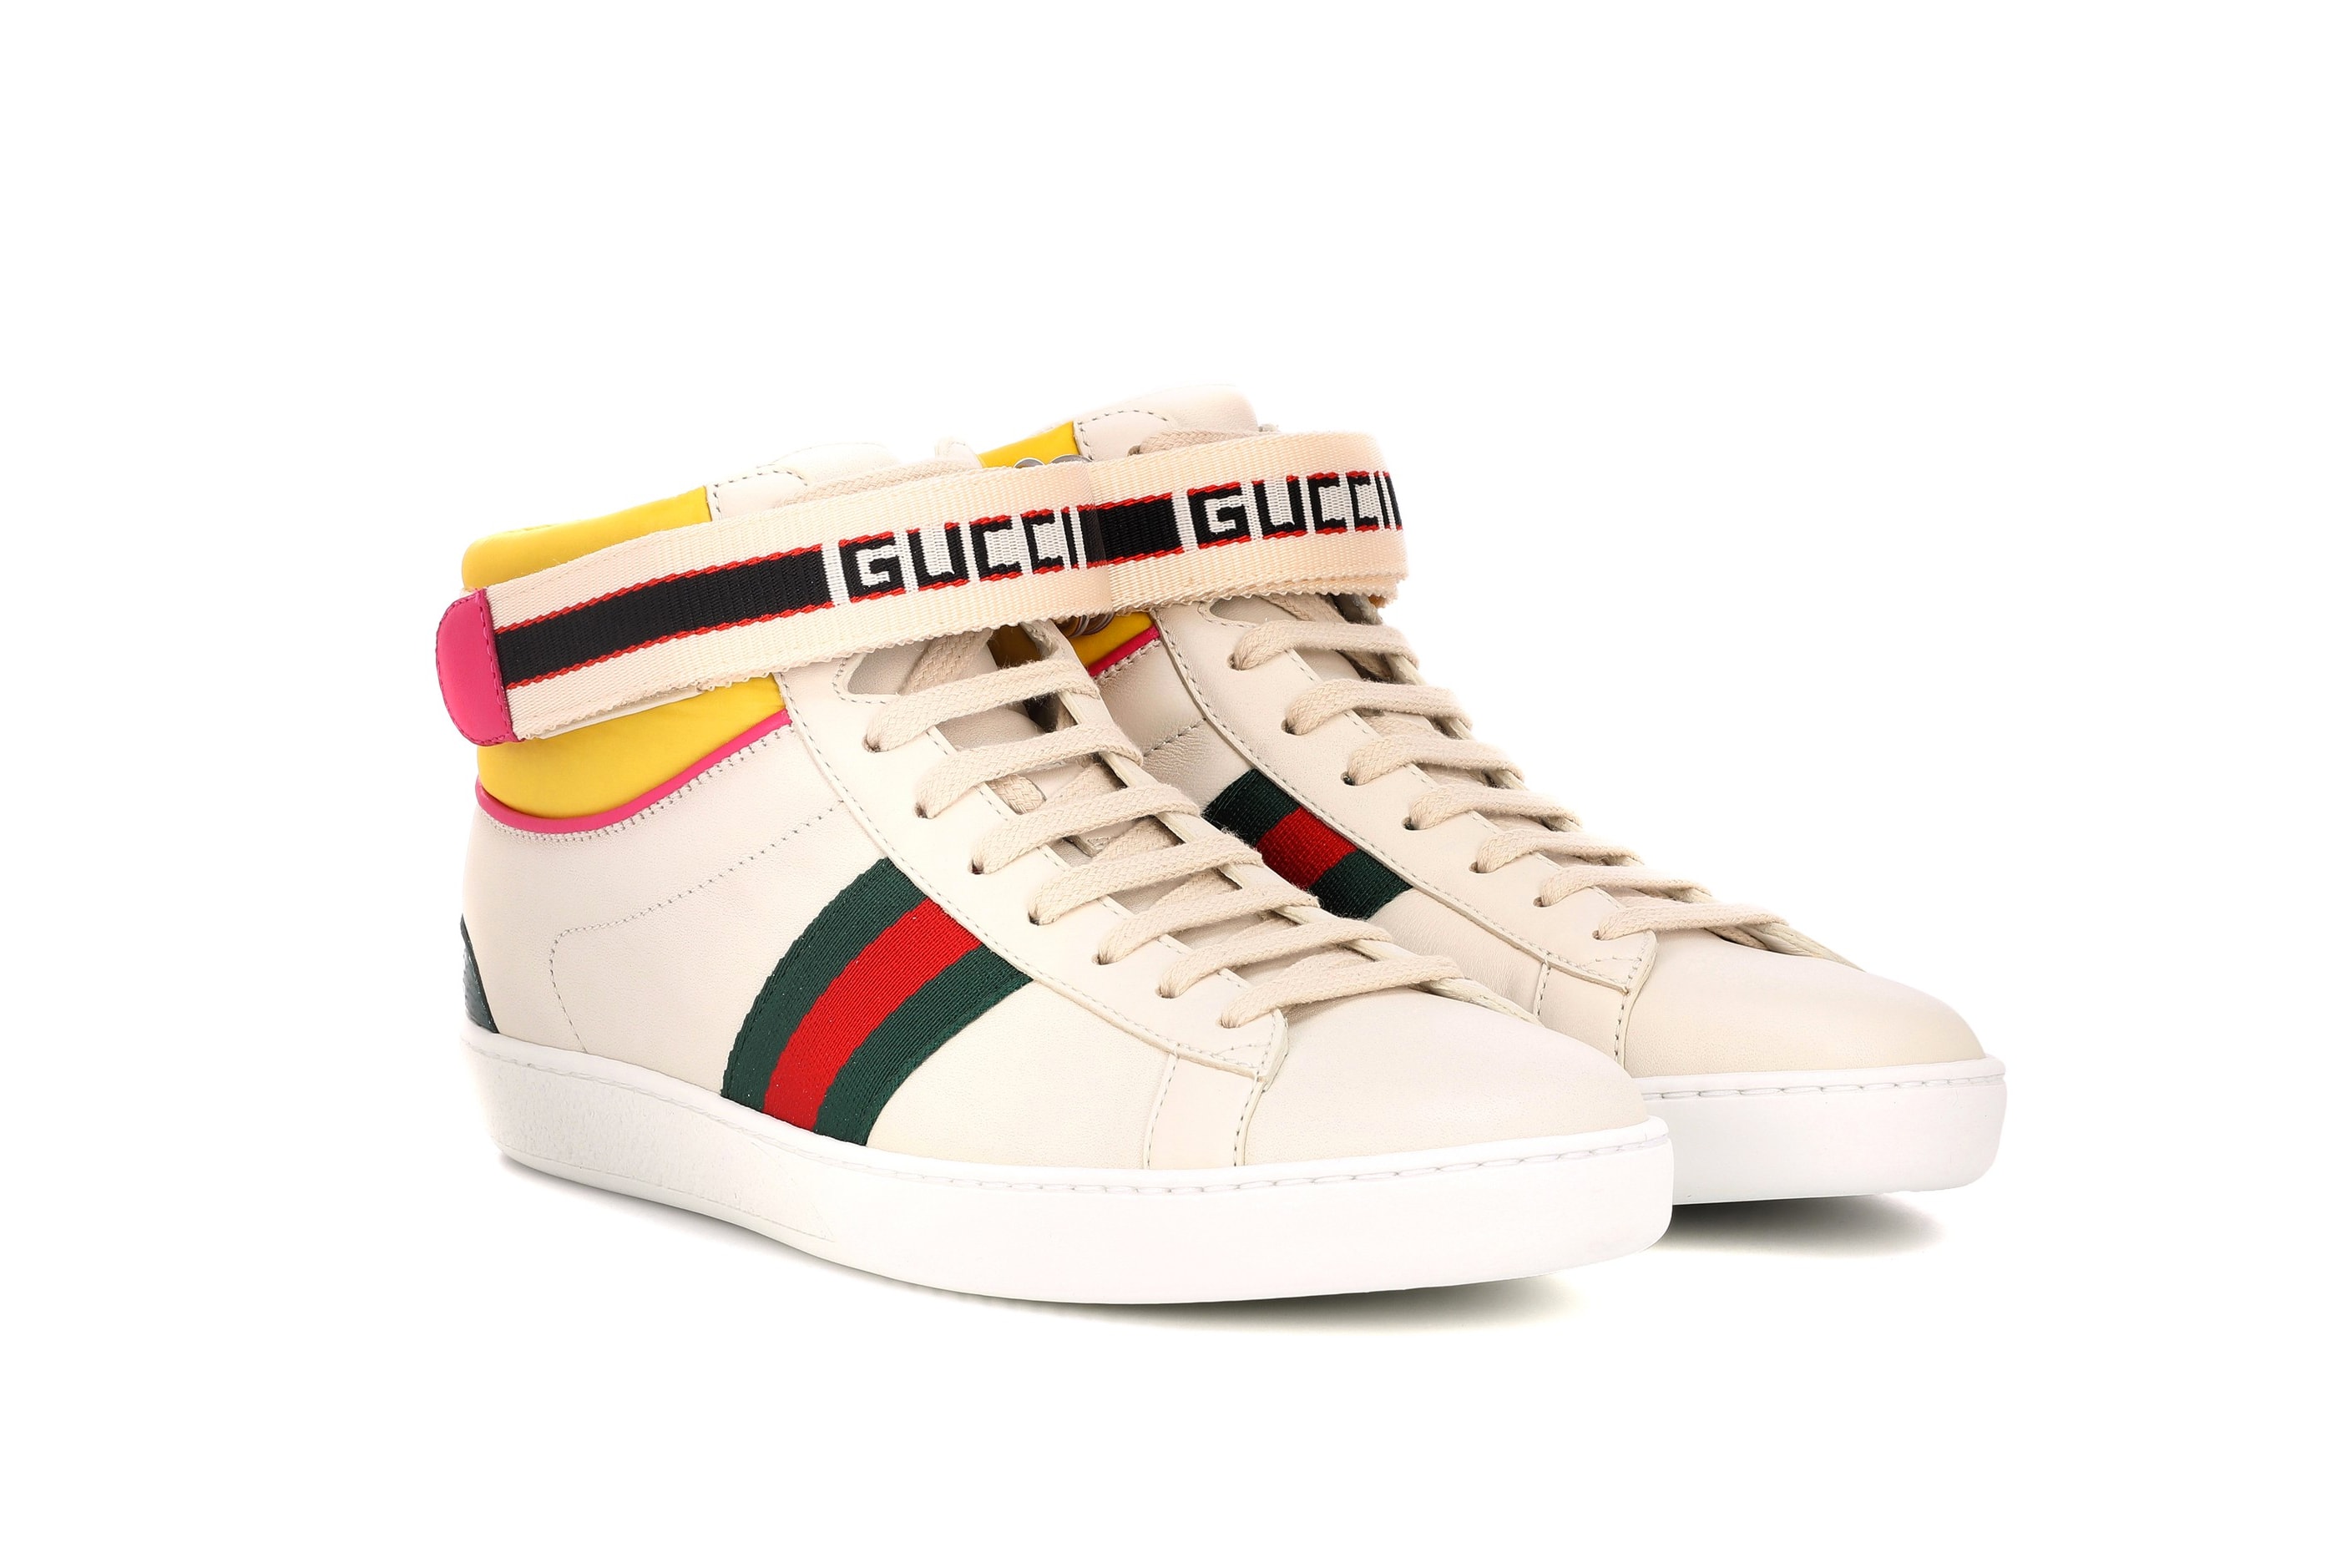 Gucci High-Top Ace Logo Sneakers White Pink Yellow Retro 70s